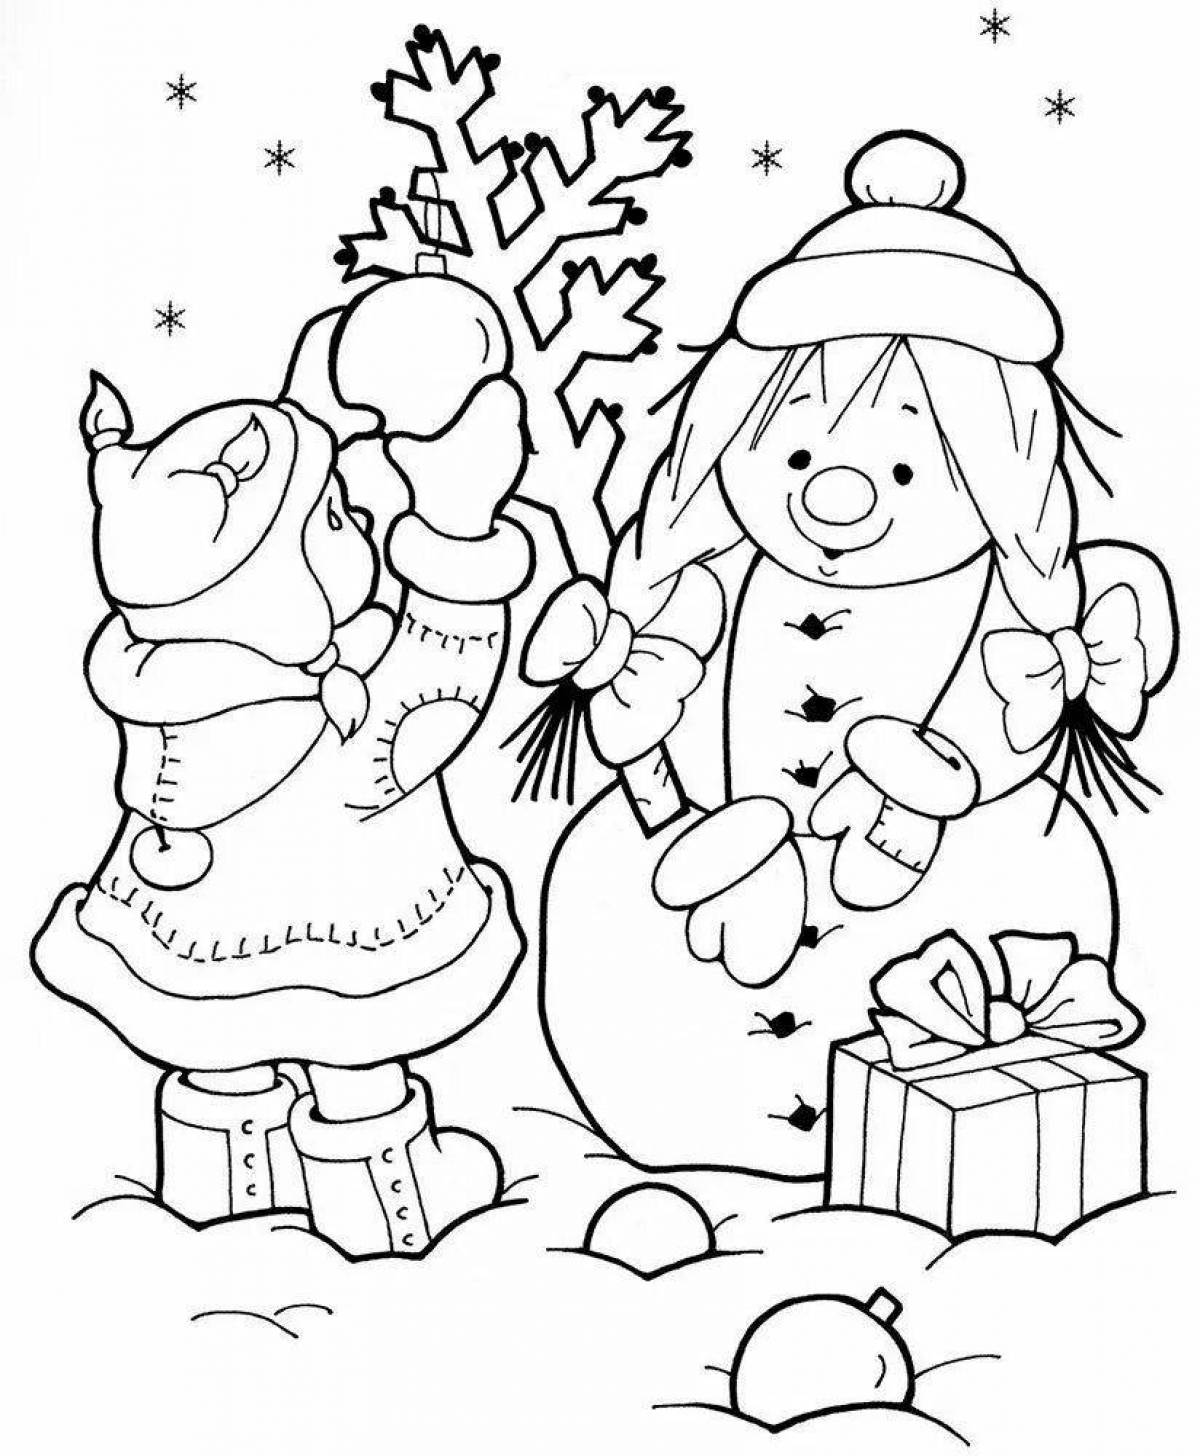 Charming winter coloring book for kids 6-7 years old